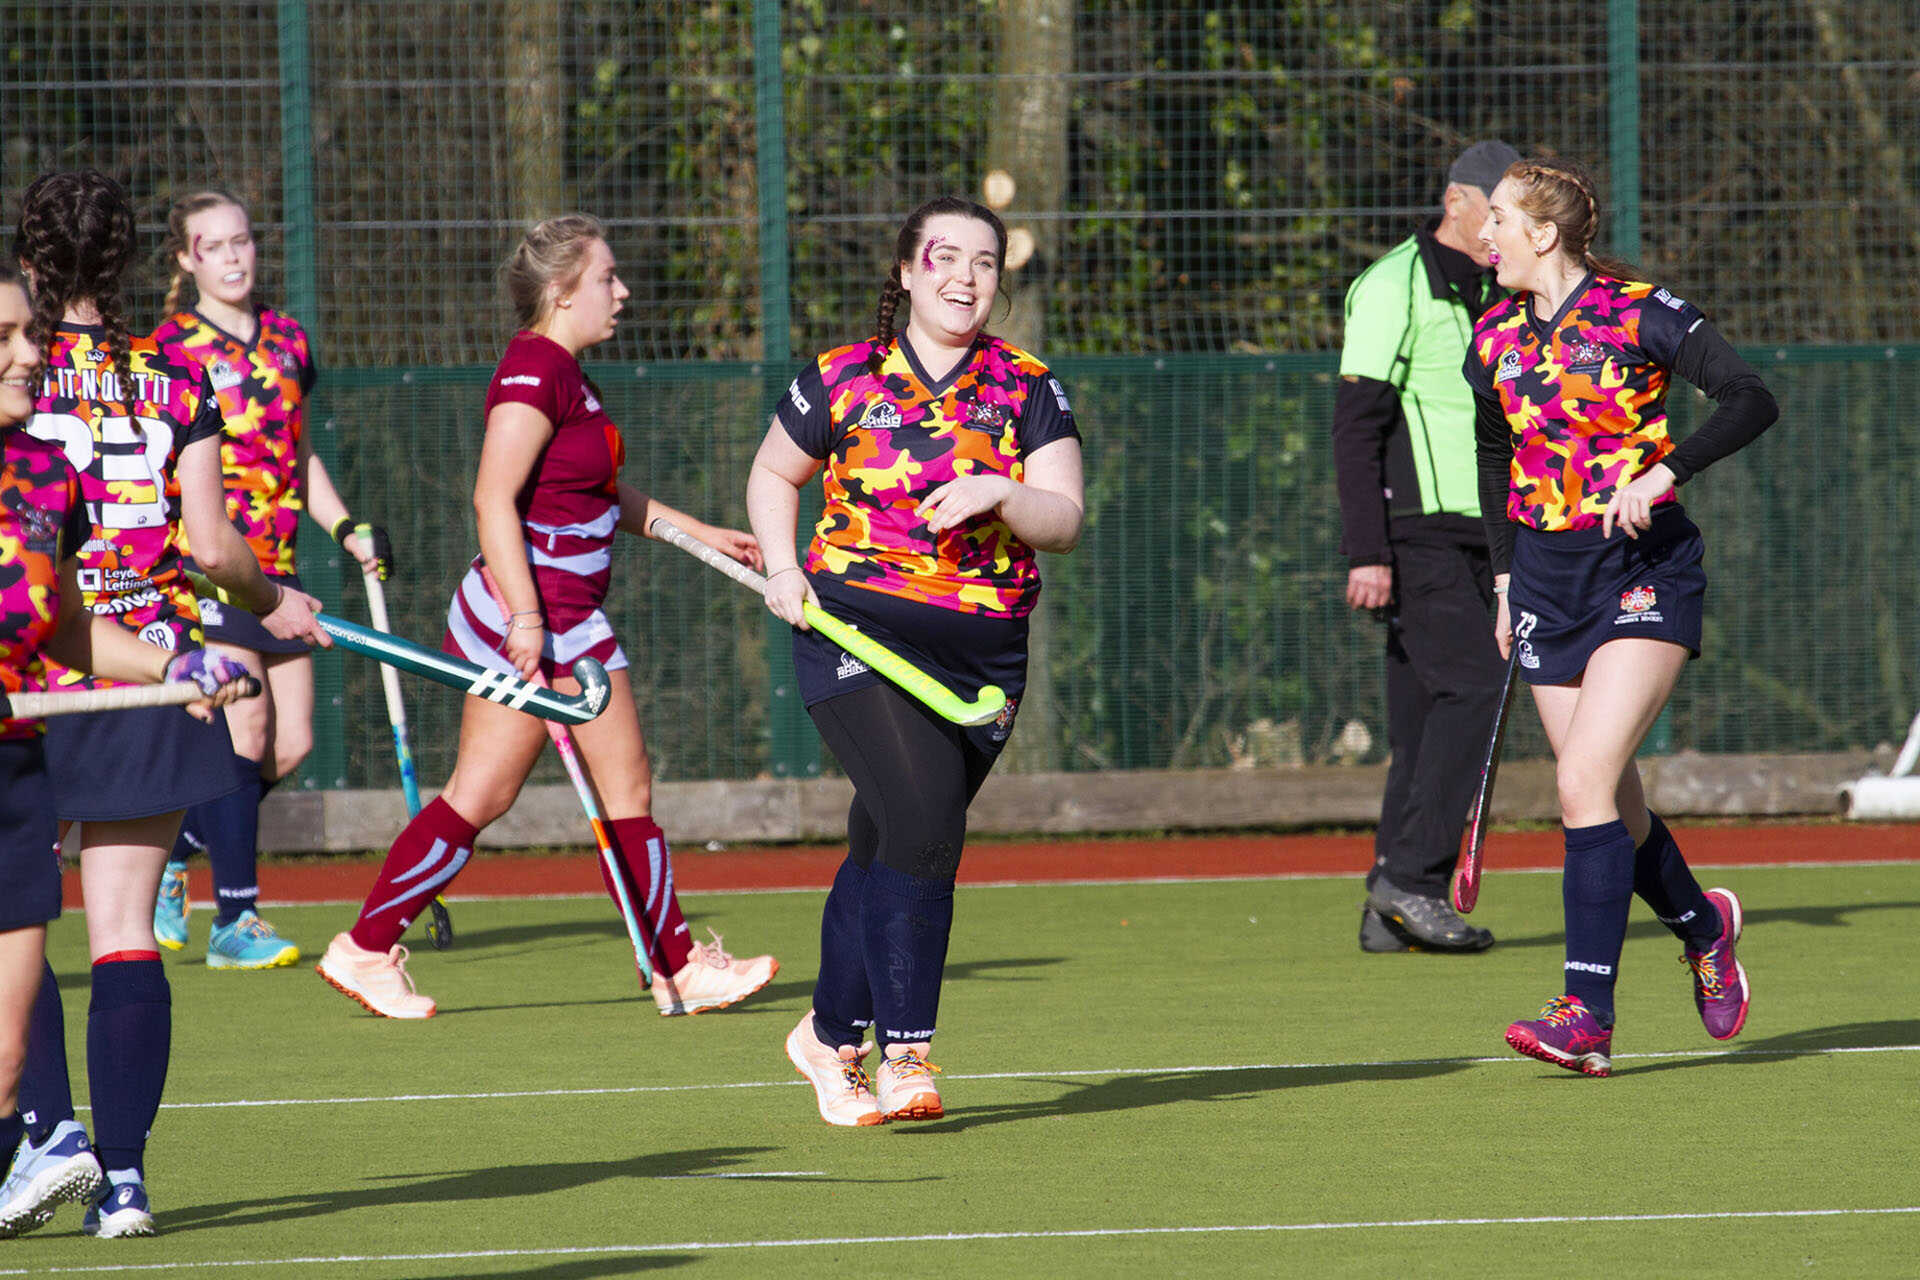 Male hockey player chasing the ball across the hockey pitch, wearing Team Kent kit